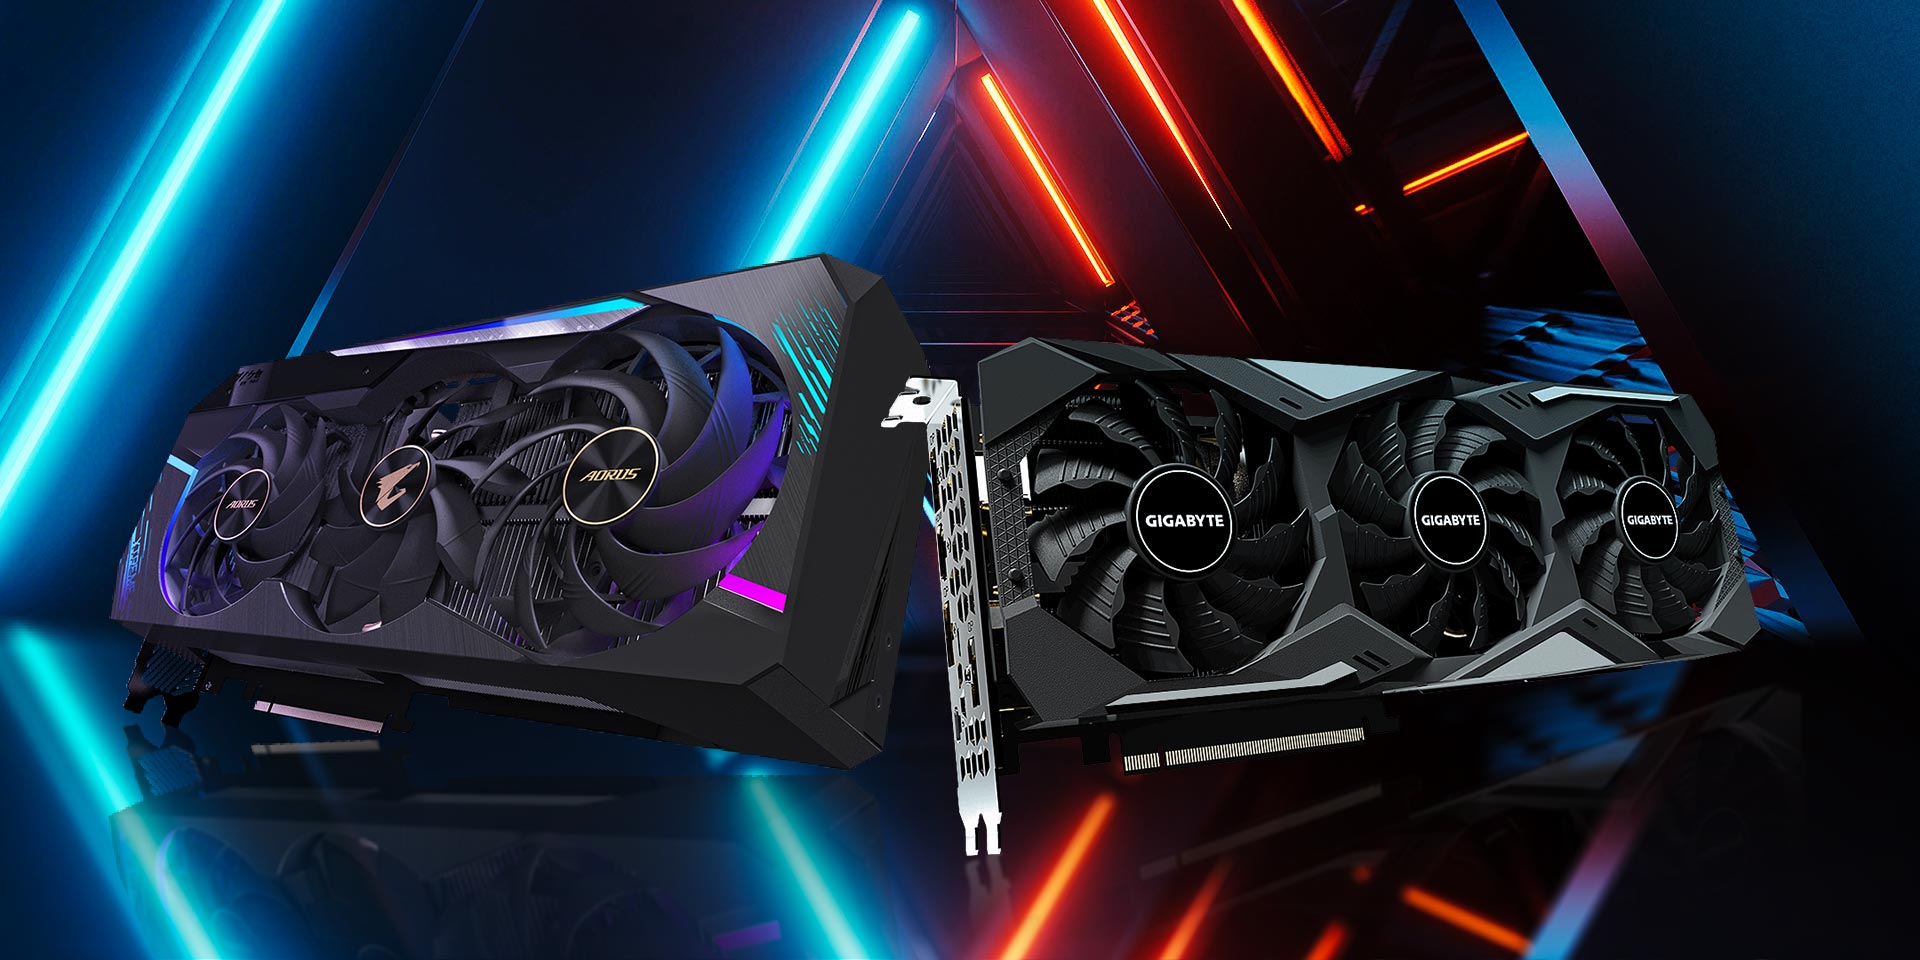 Get 4 Years Warranty for Your AORUS GIGABYTE Graphics Card | AORUS